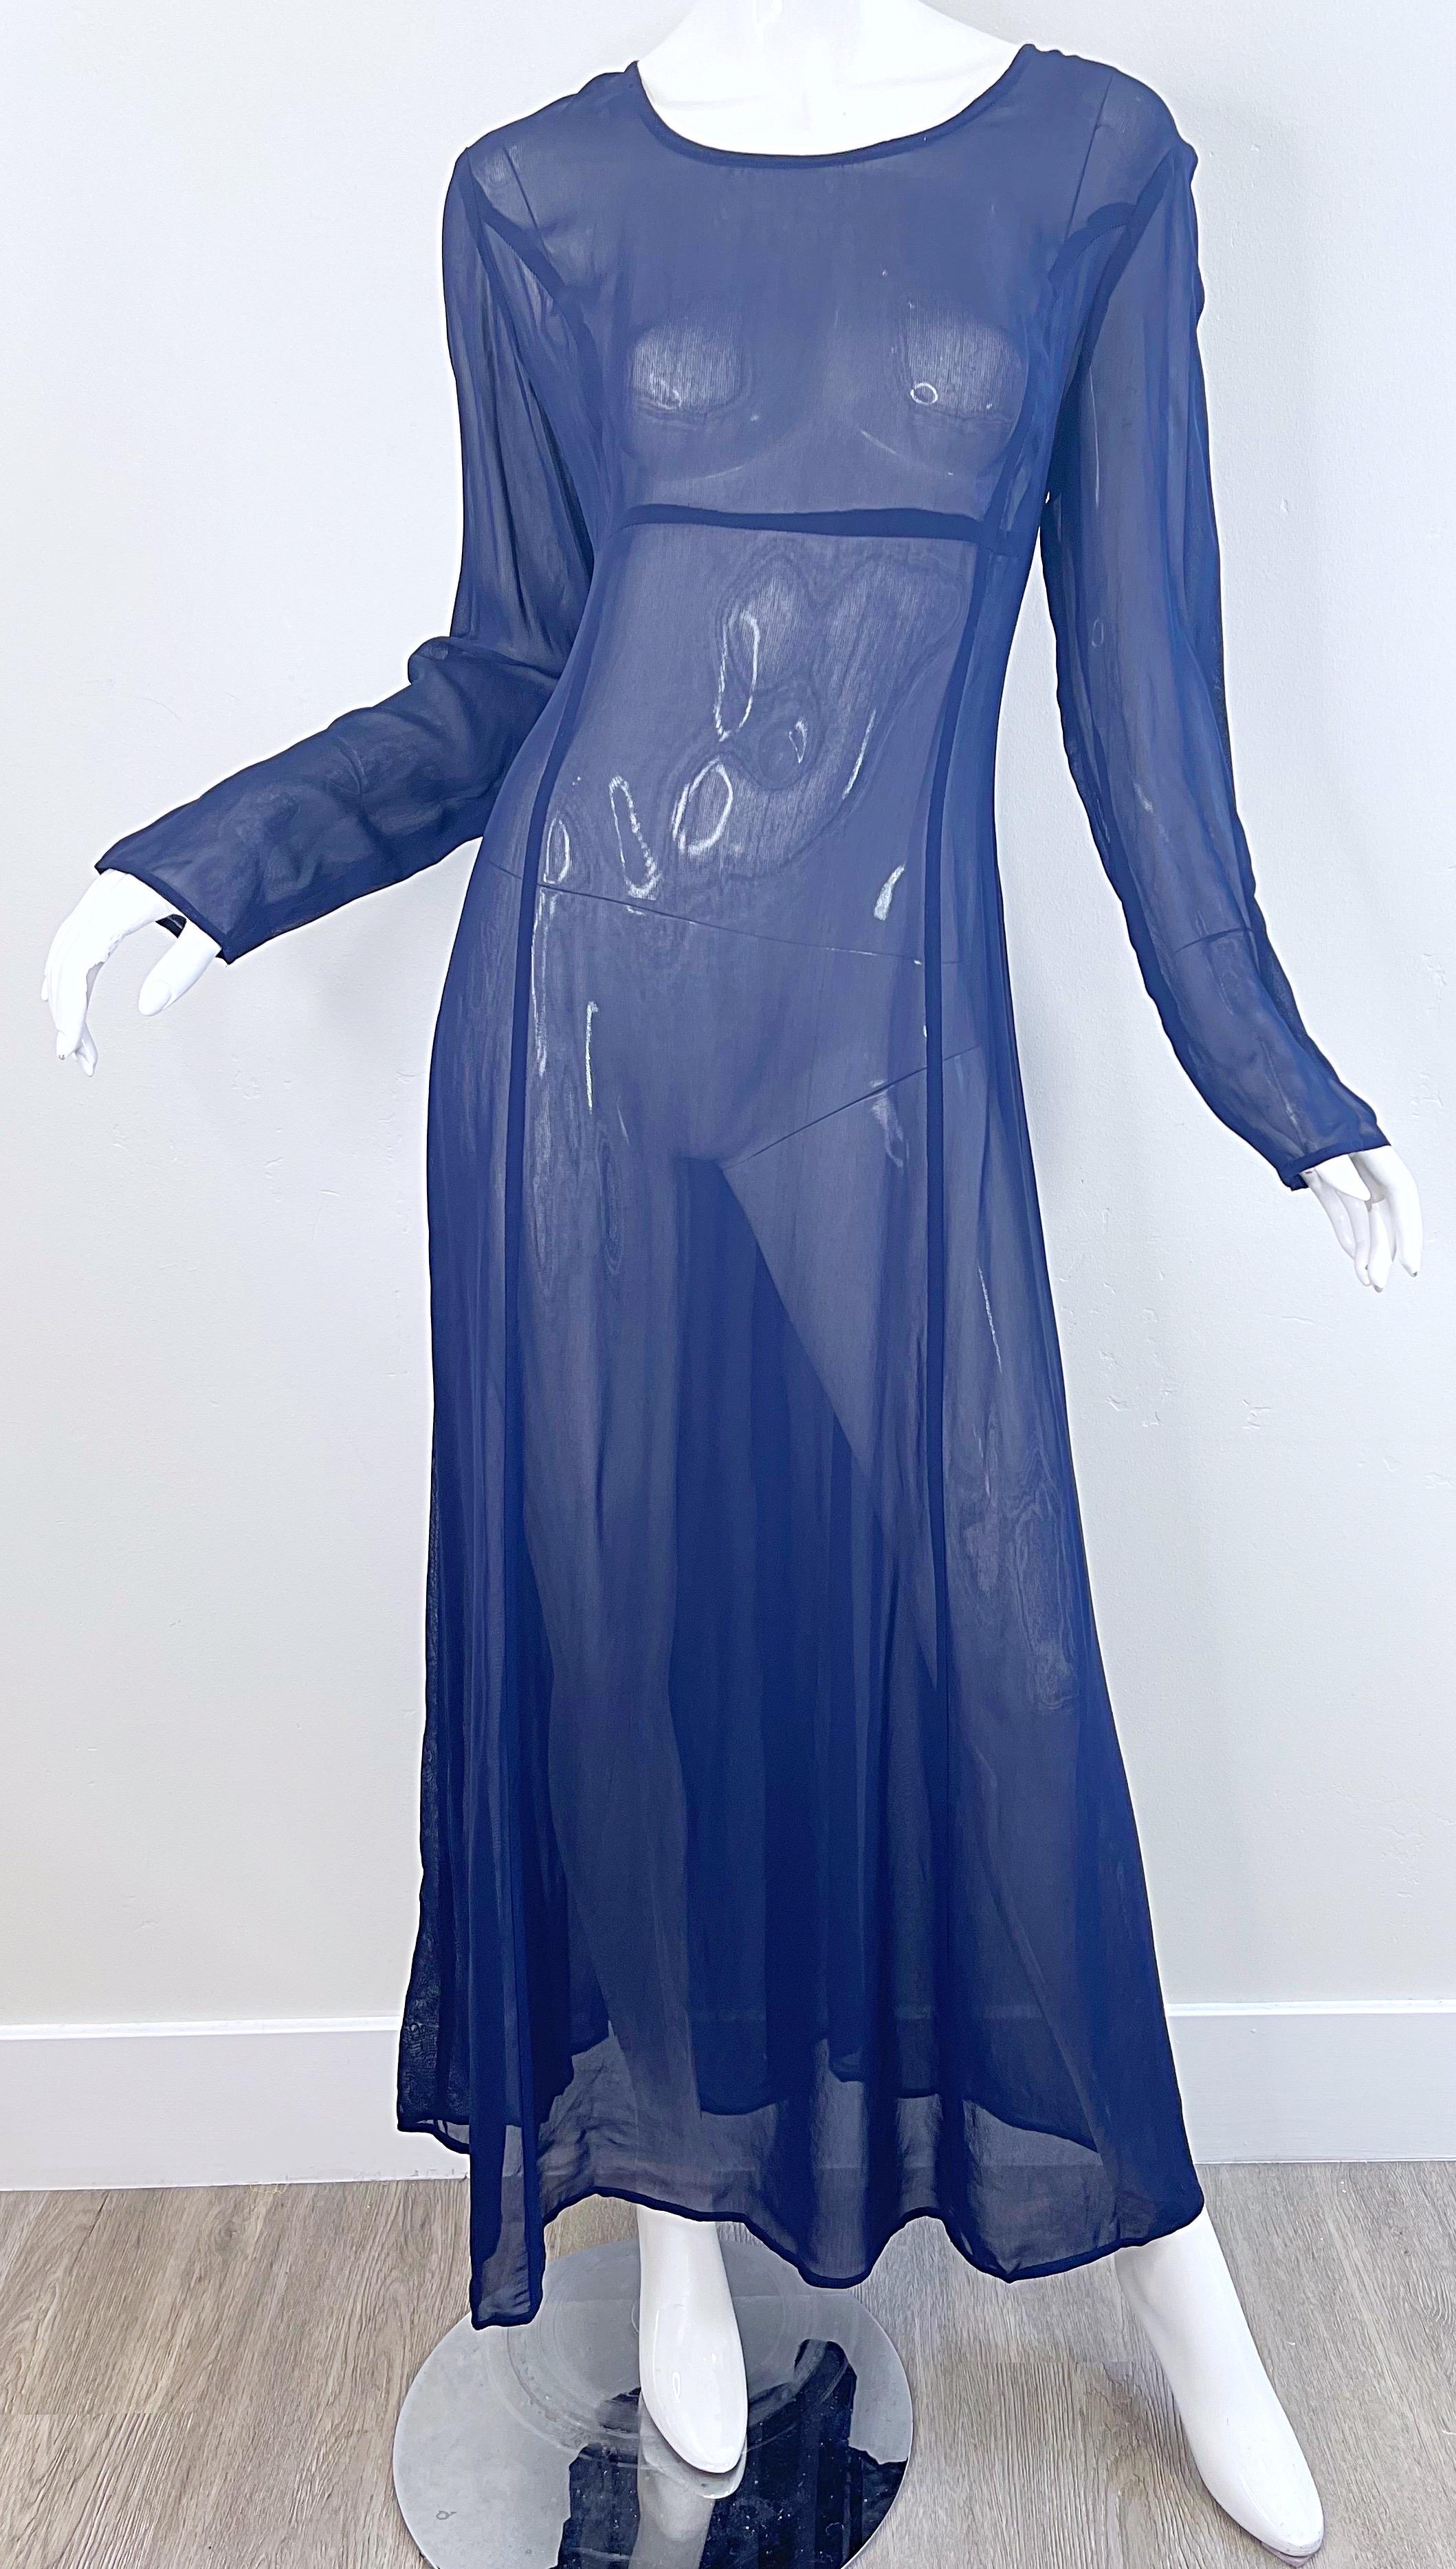 NWT 1990s I Magnin Size 10 Sheer Navy Blue Long Sleeve Vintage 90s Maxi Dress For Sale 10